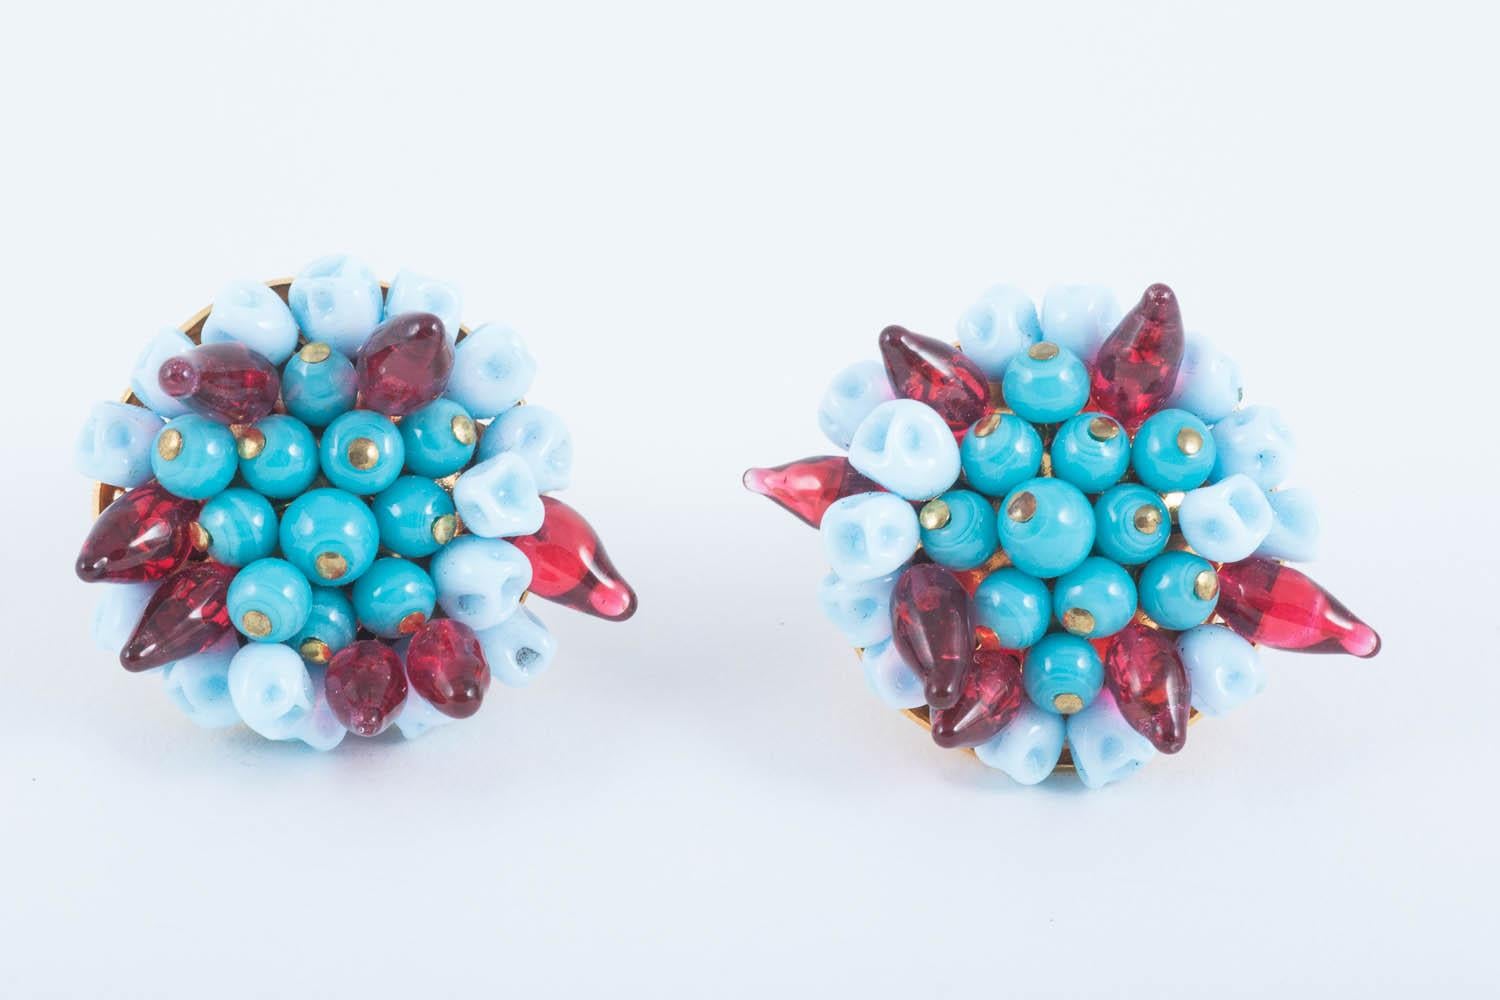 Beautiful large cluster earrings, hand made by artisans if Paris by Histoire de Verre.
Compromising of two tones of turquoise glass beads, the lighter 'pinched' at the tip , to form 'blossom' like beads, the darker beads are round. Both earrings are